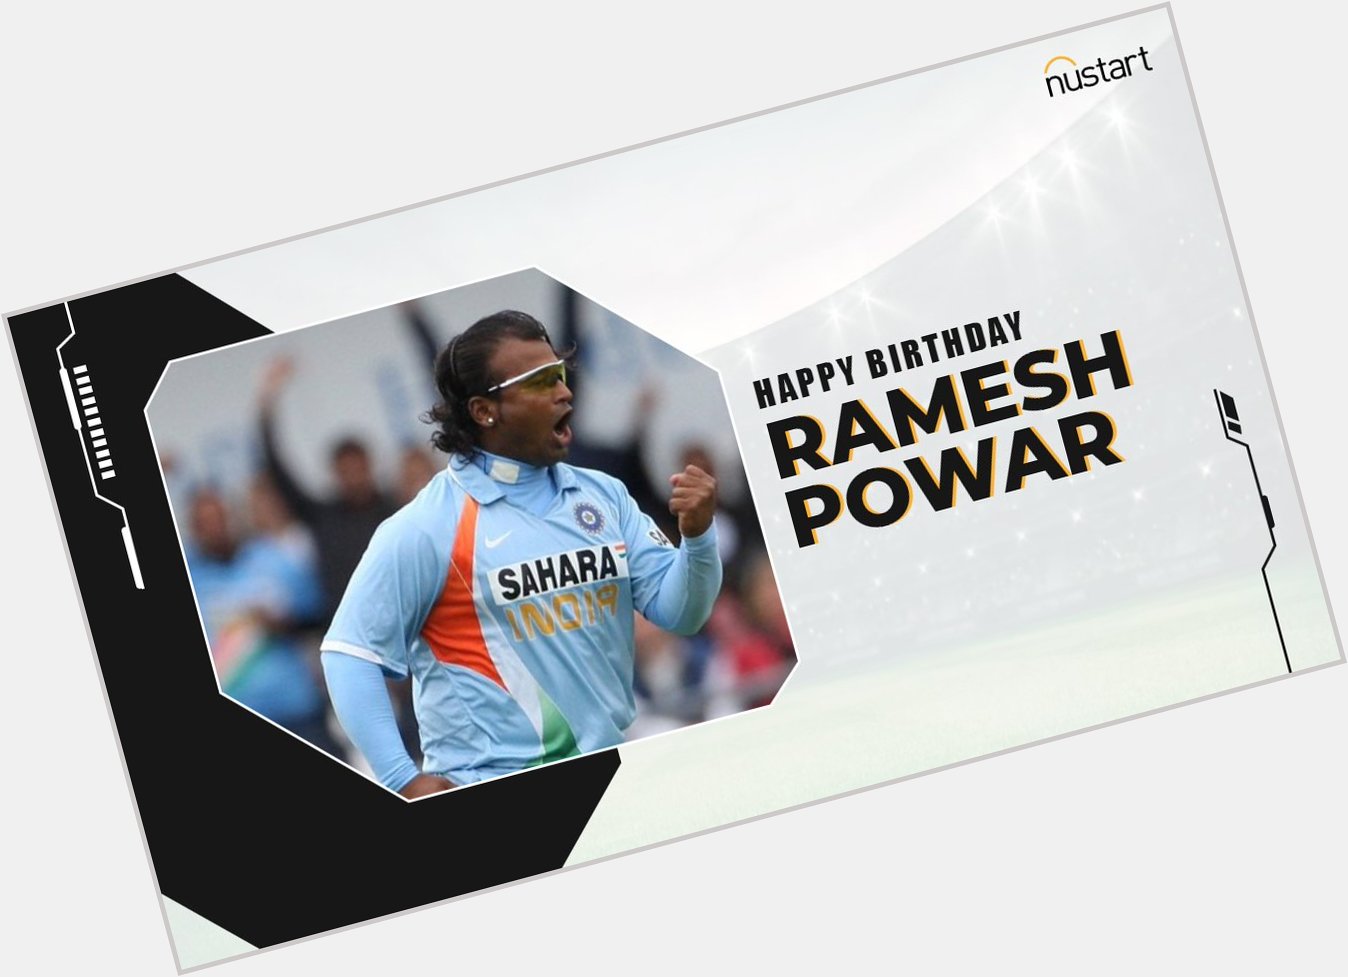 Wishing the former cricketer and coach of India\s Women\s Team - Ramesh Powar, a very happy birthday! 